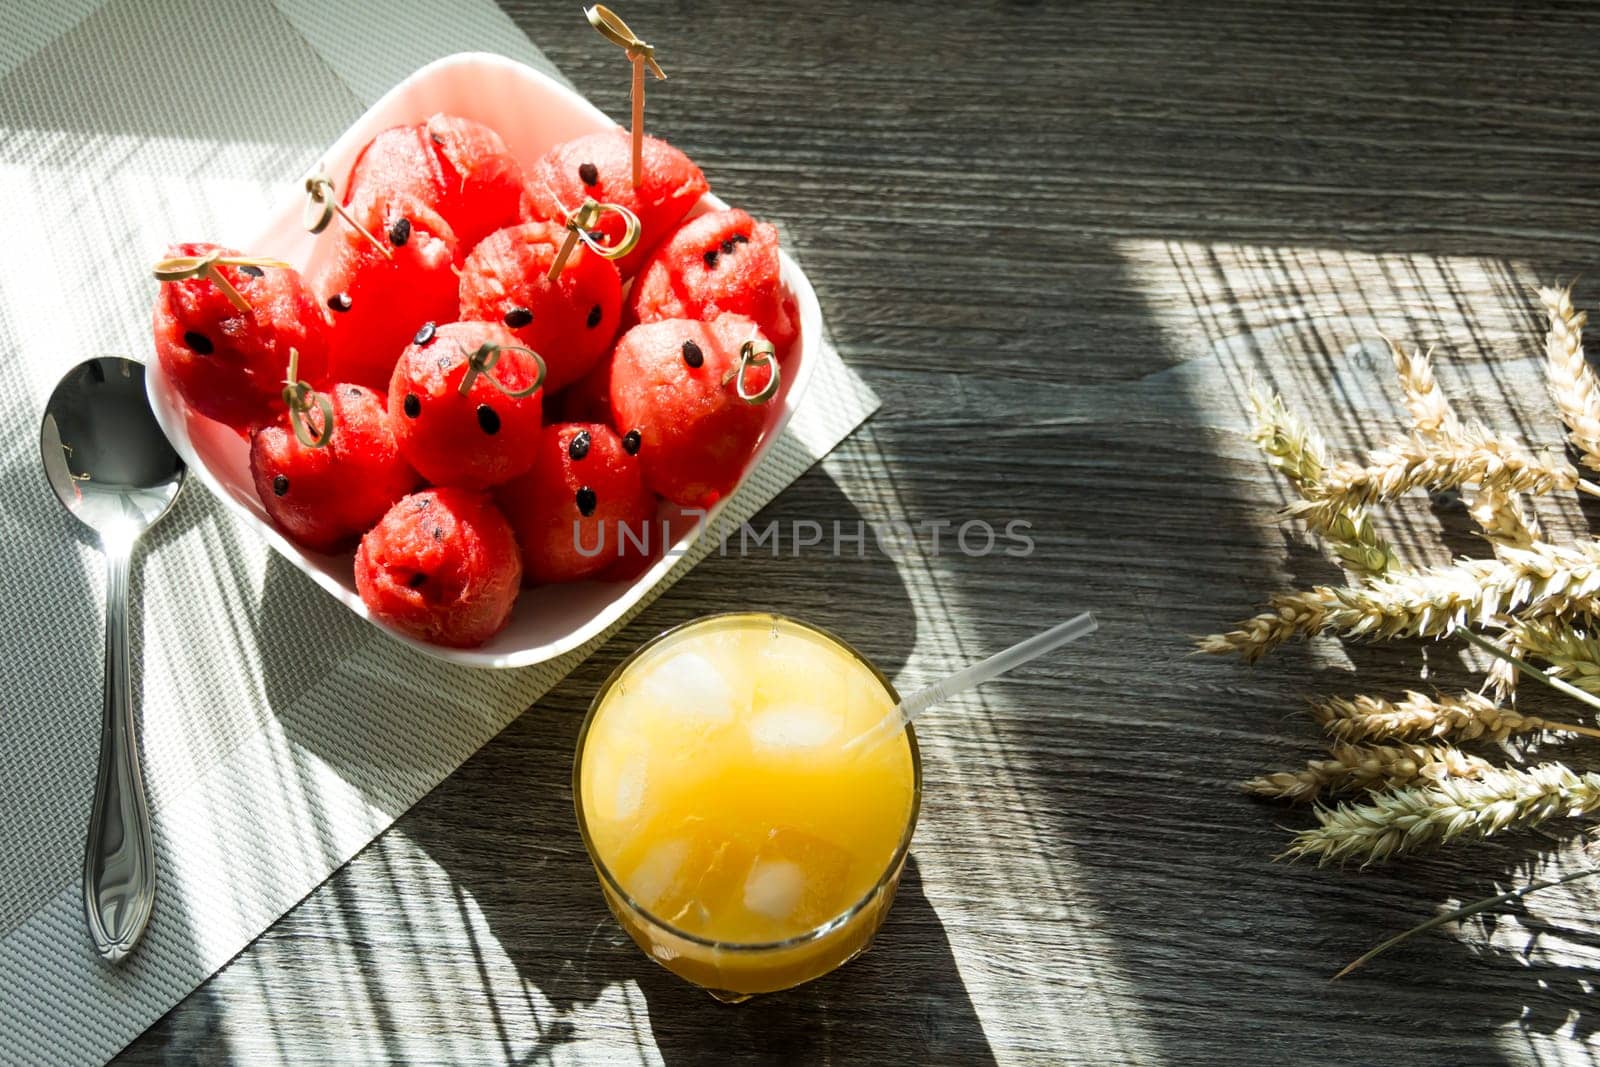 Freshly squeezed orange juice, sweet watermelon dessert and spikelets of ripe wheat on a wooden table in the sunlight... by Alla_Yurtayeva